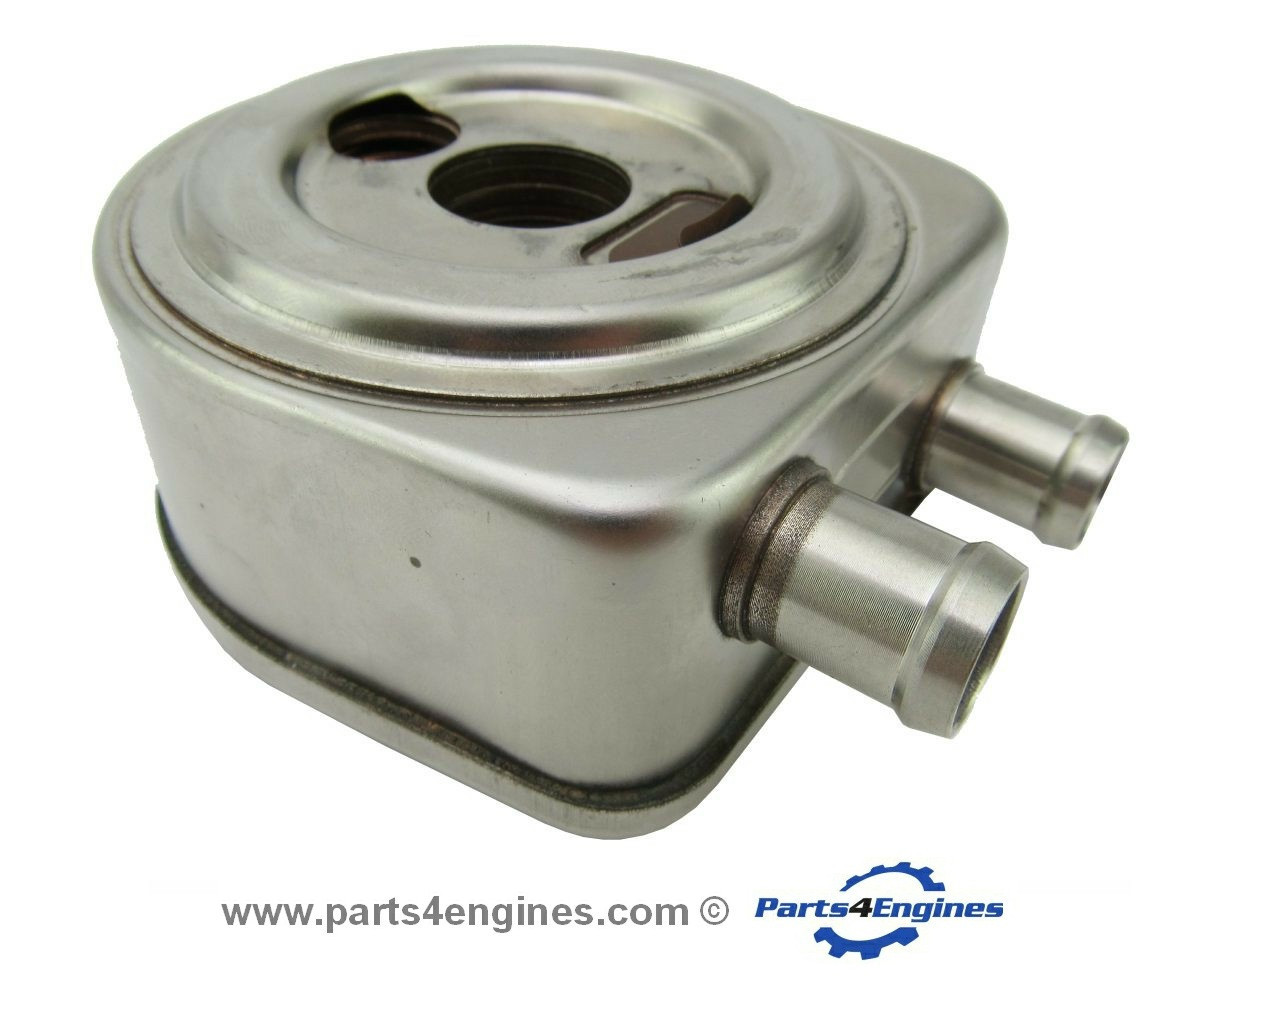 Volvo Penta D2-75 oil cooler 3589333, from parts4engines.com